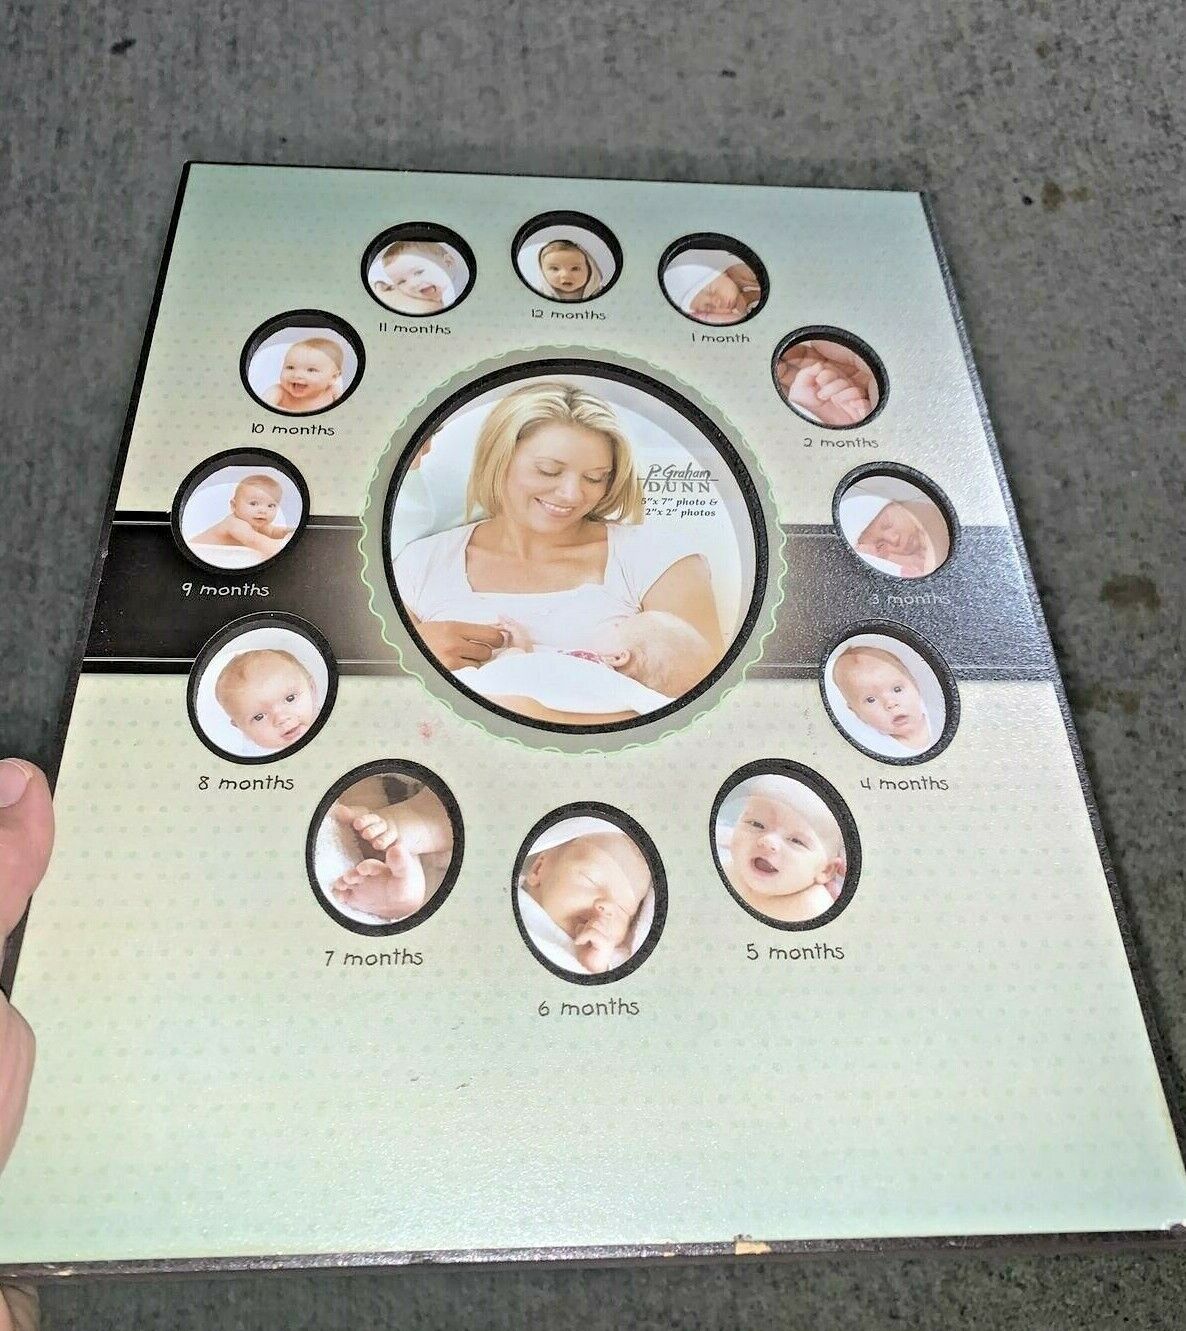 P Graham Dunn MADE IN USA Newborn Baby Picture Frame 1 to 12 months ❤️sj11h1s